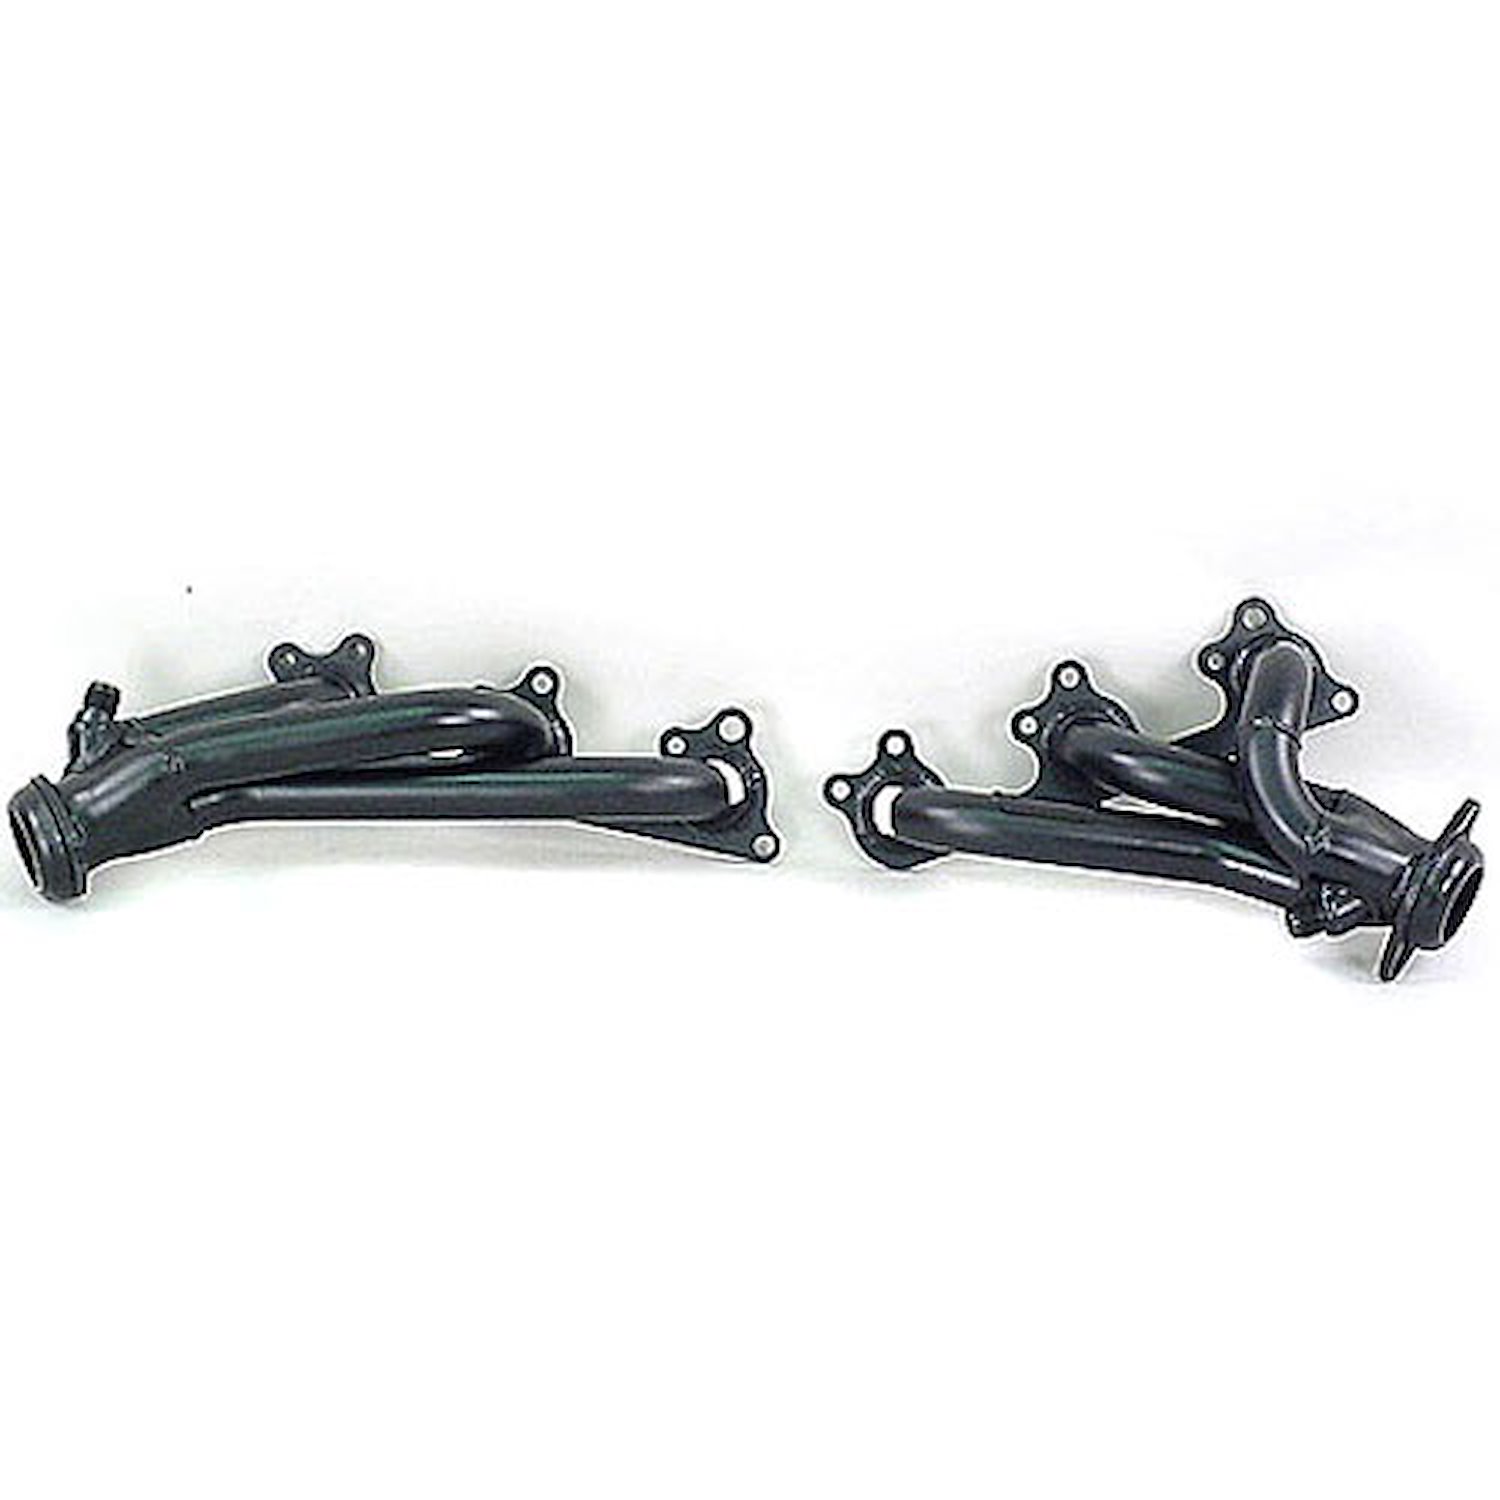 Painted Truck Headers 1998-2007 Ford Ranger/Explorer & Mazda B4000 2/4WD SOHC 4.0L with EGR